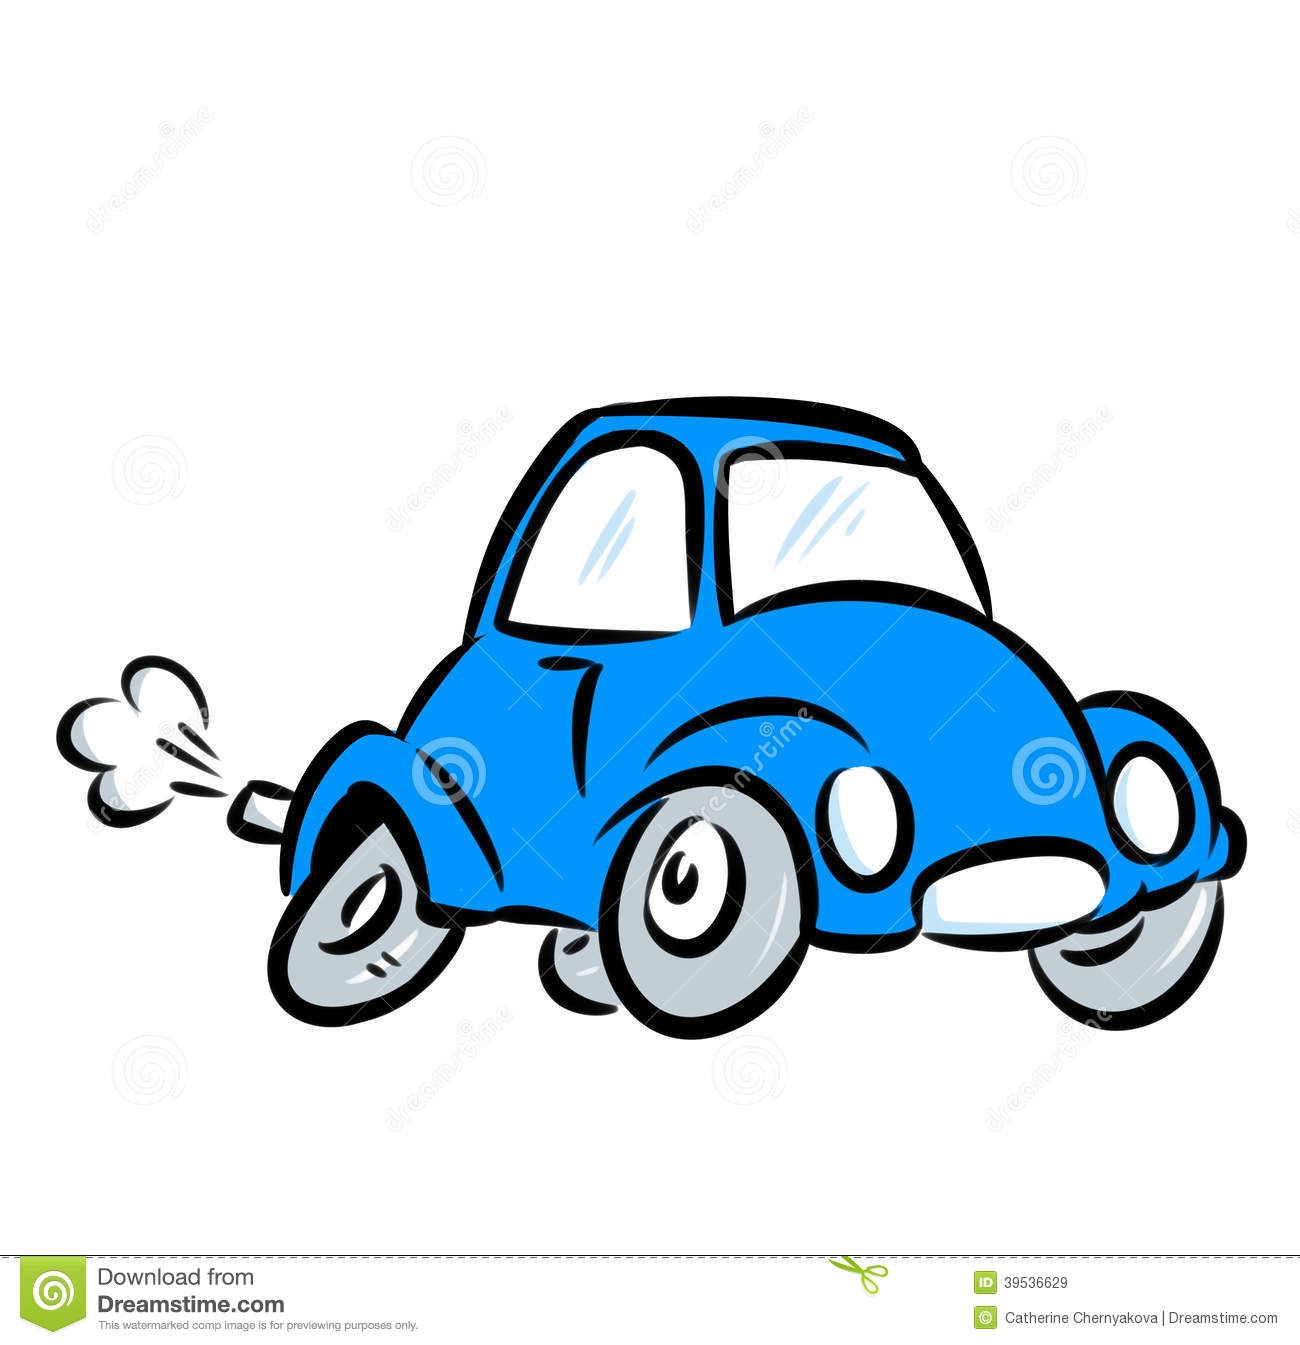 Moving car clipart.